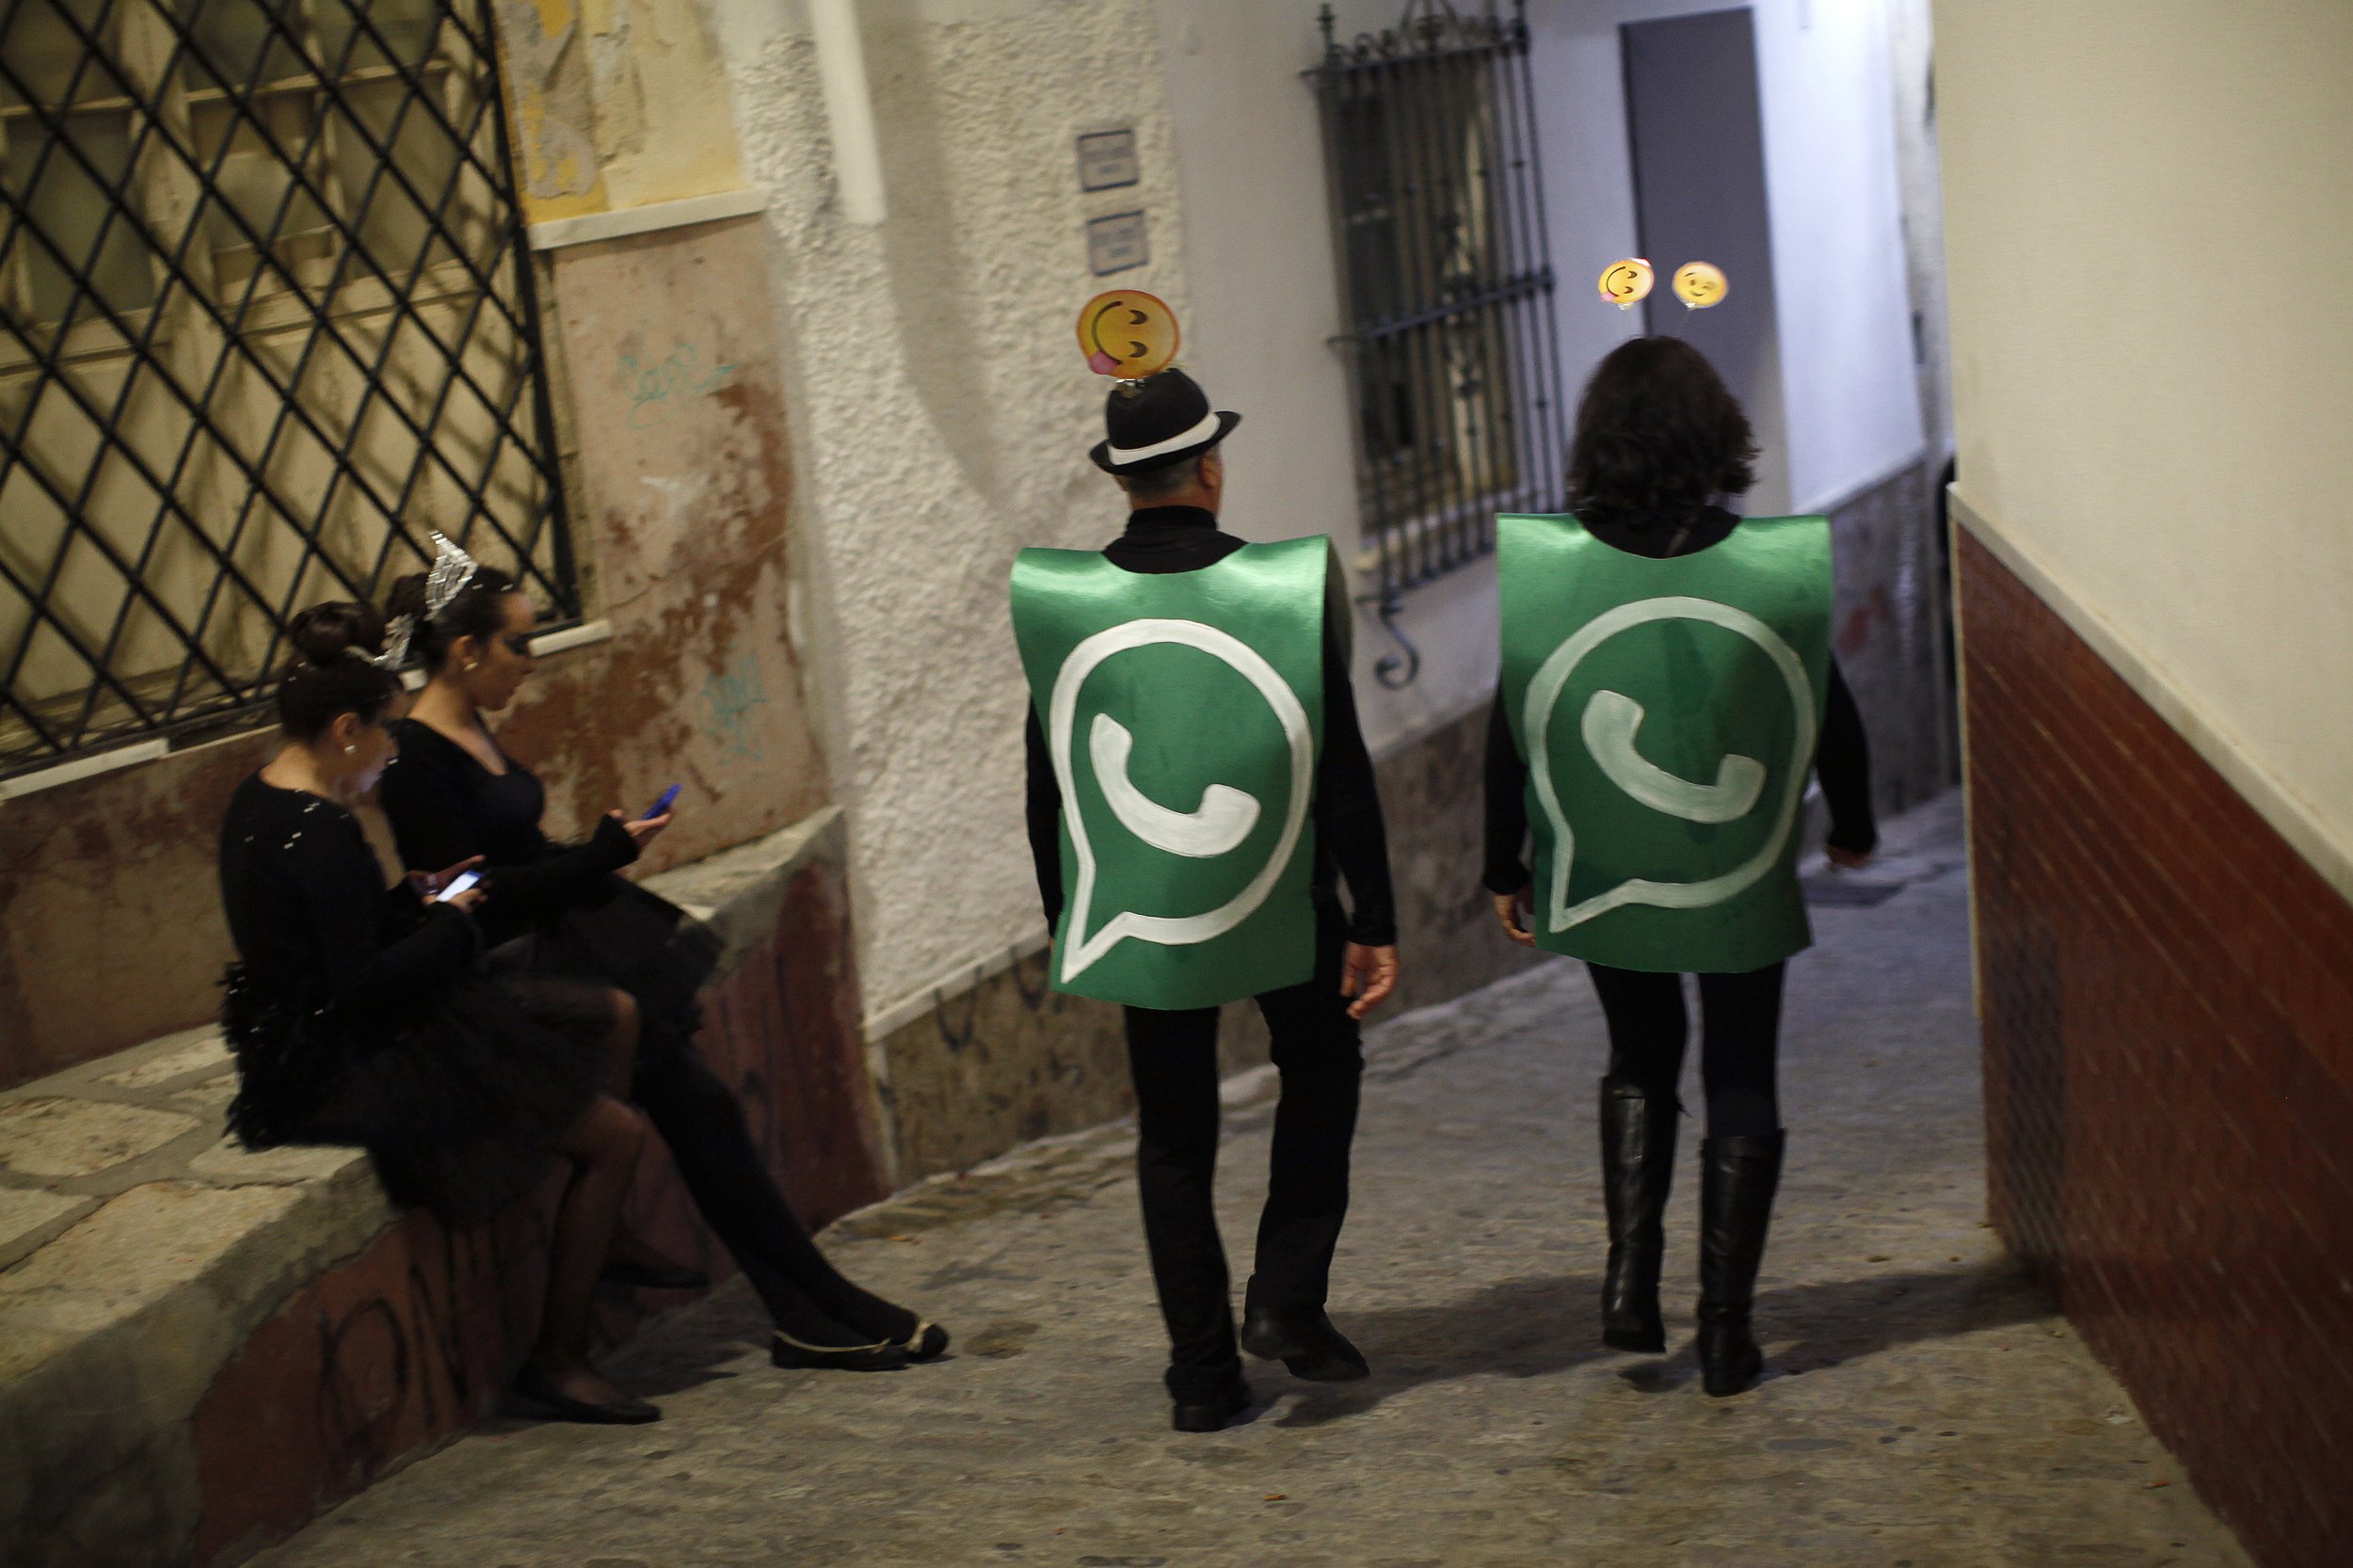  WhatsApp status settings are shown on the backs of two people wearing green WhatsApp logo costumes.